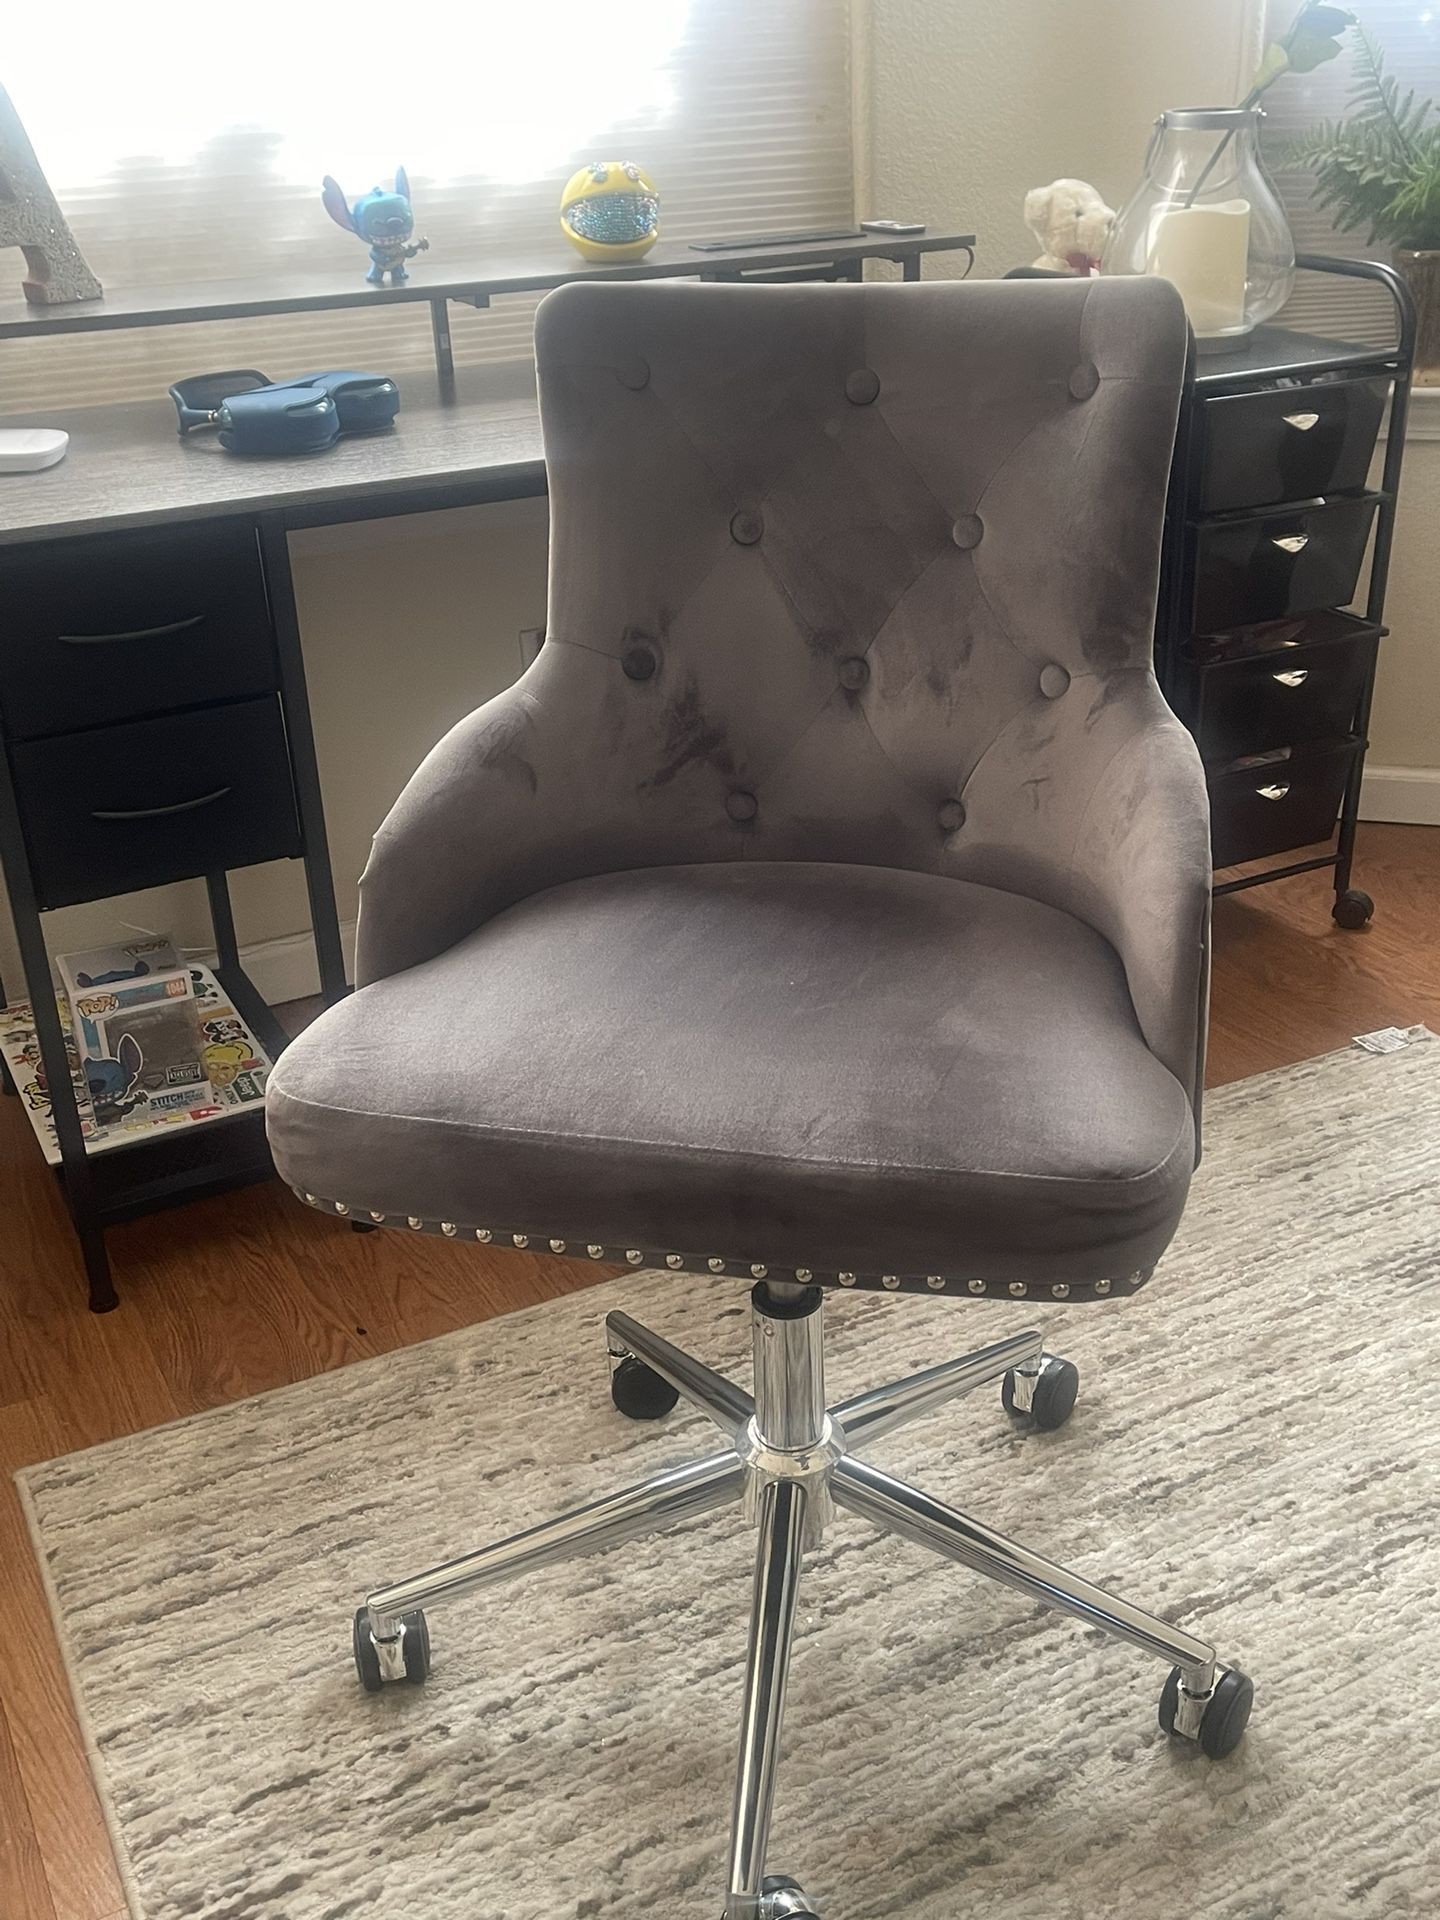 Swivel Desk Chair With Wheels - Excellent Condition